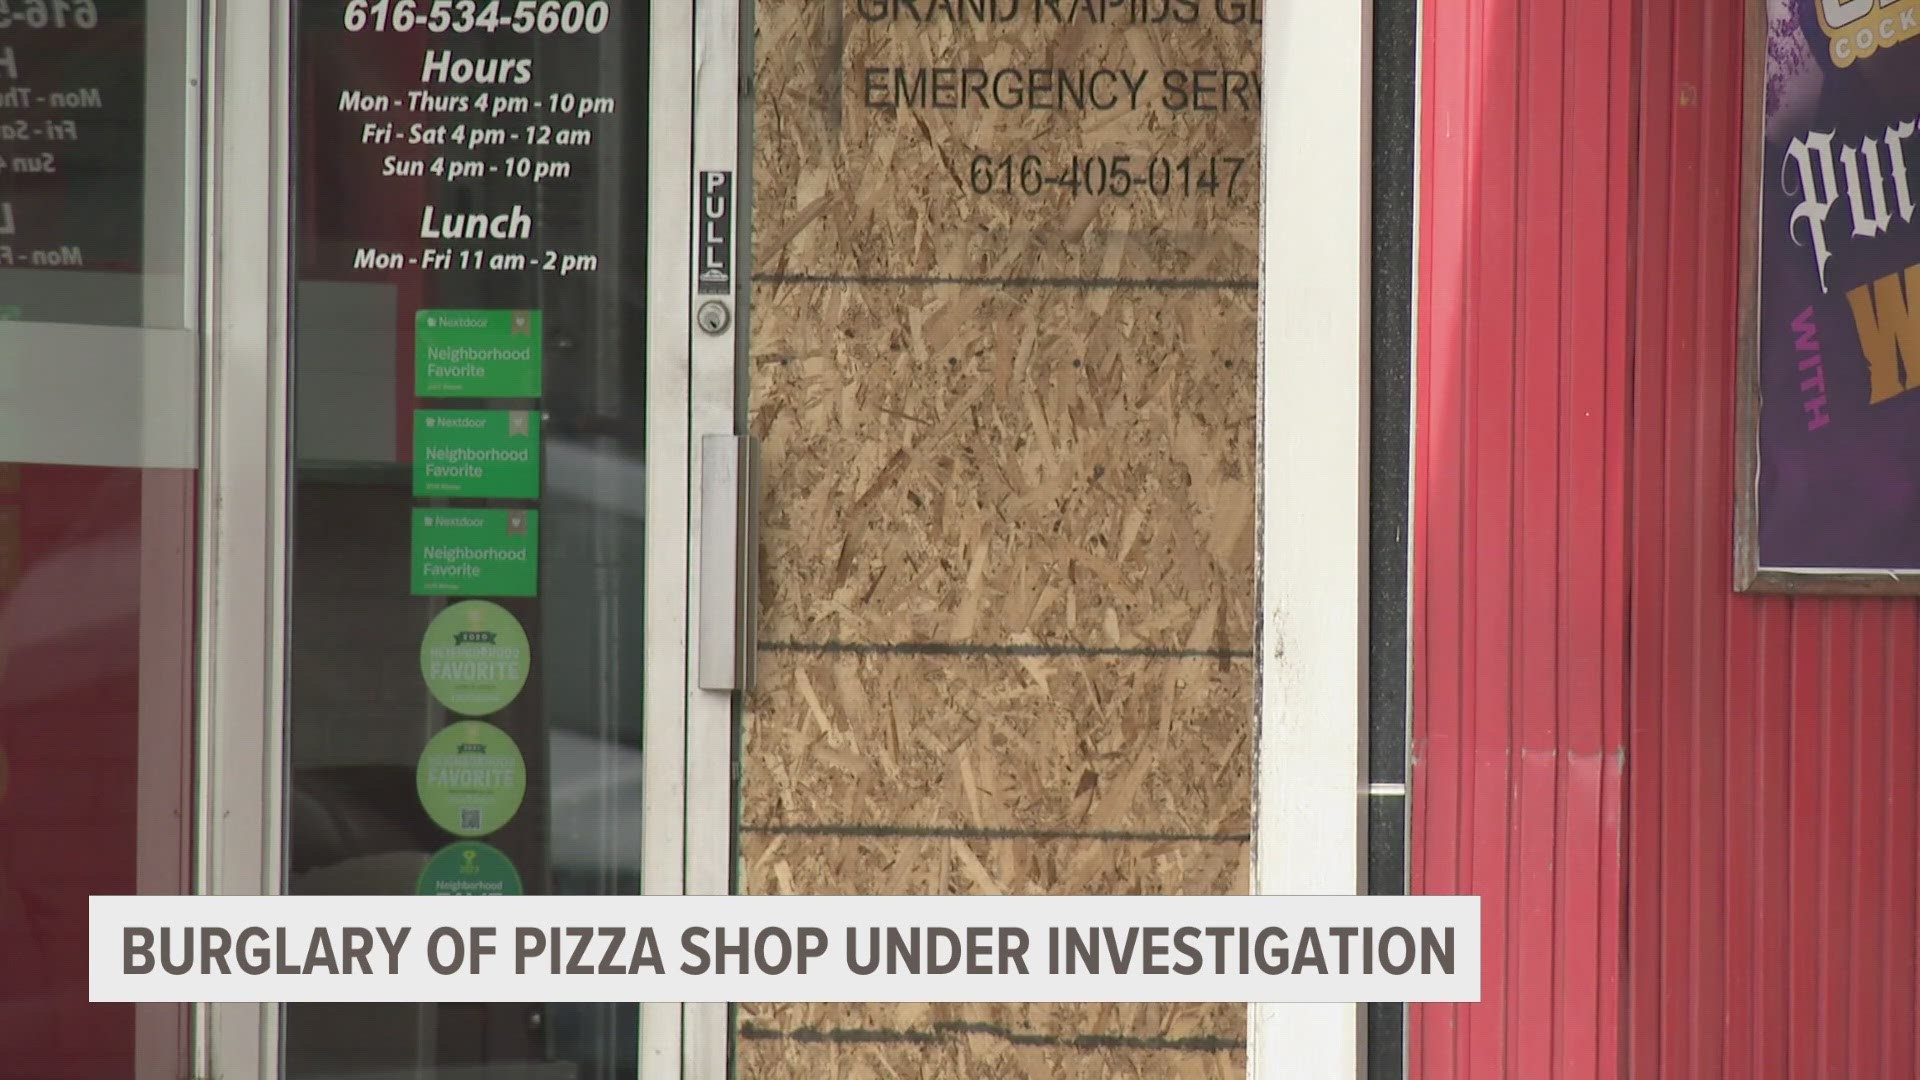 An employee said the break-in happened around 5 a.m. Staff believe the suspect threw a brick through the door to get into the pizza place.